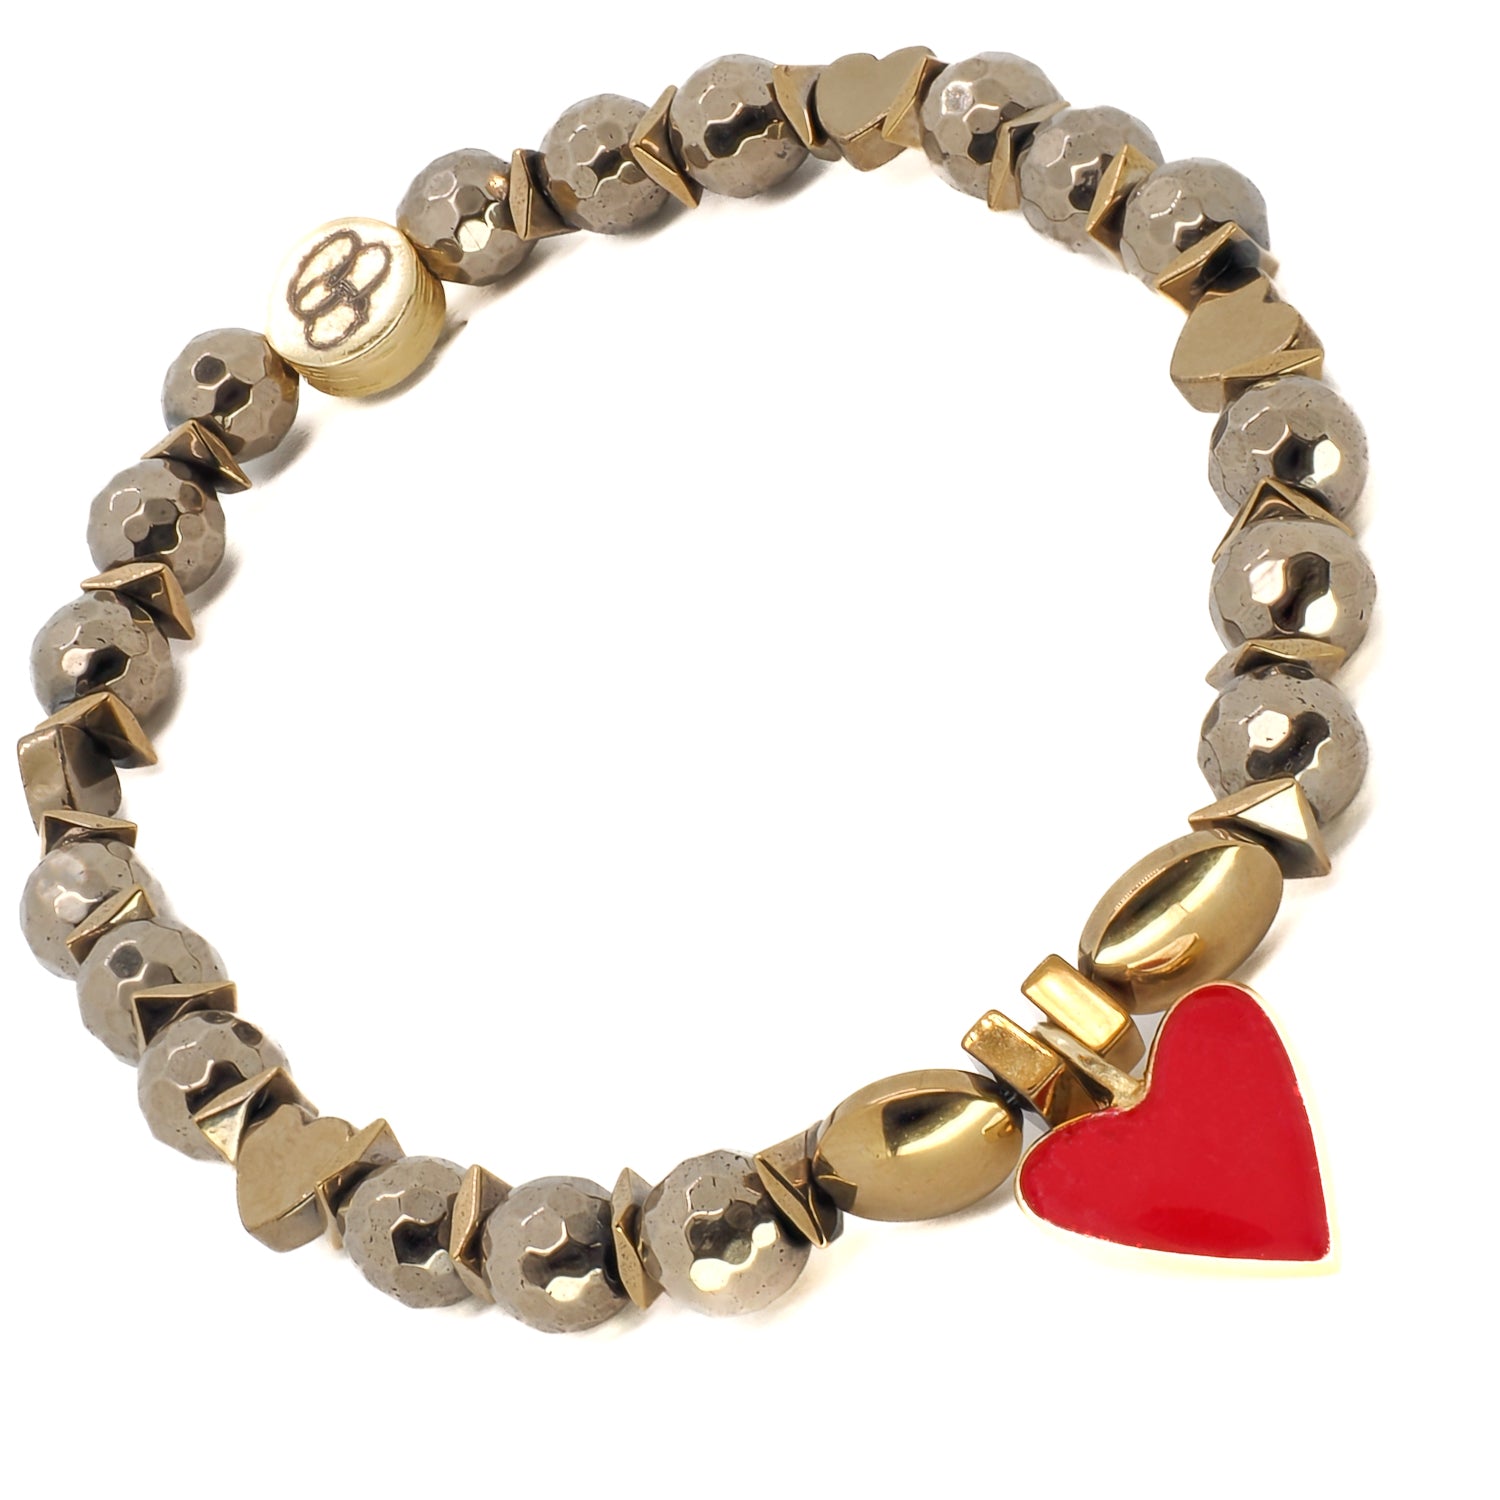 Express your affection with the Red Heart Love Bracelet, a unique jewelry piece featuring heart-shaped hematite beads and a red enamel charm.